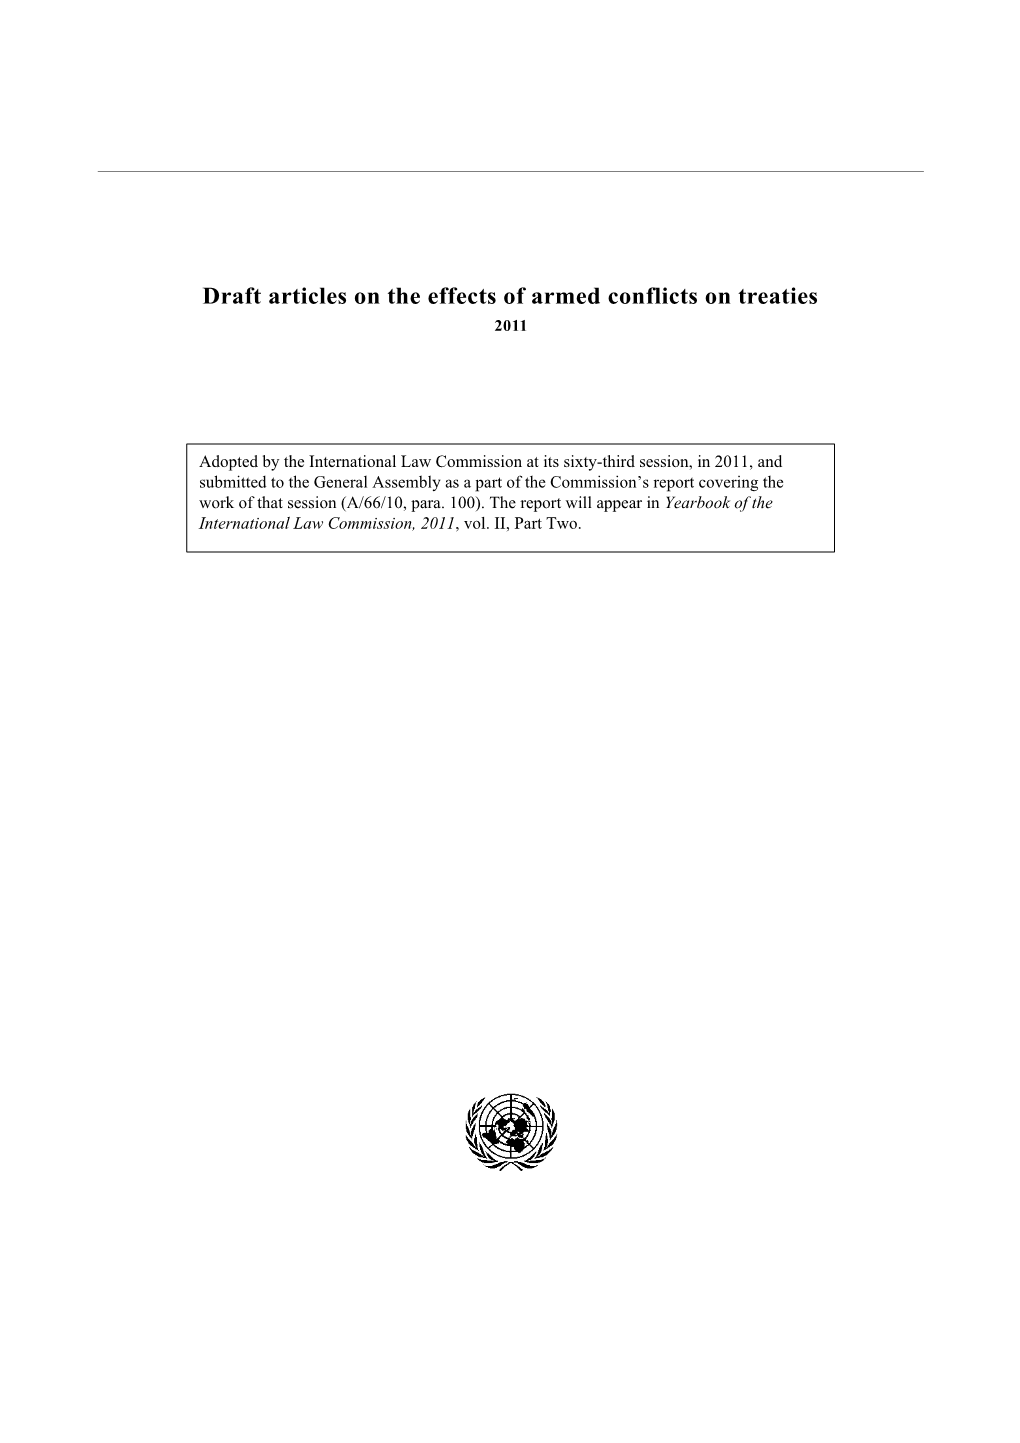 Draft Articles on the Effects of Armed Conflicts on Treaties, 2011